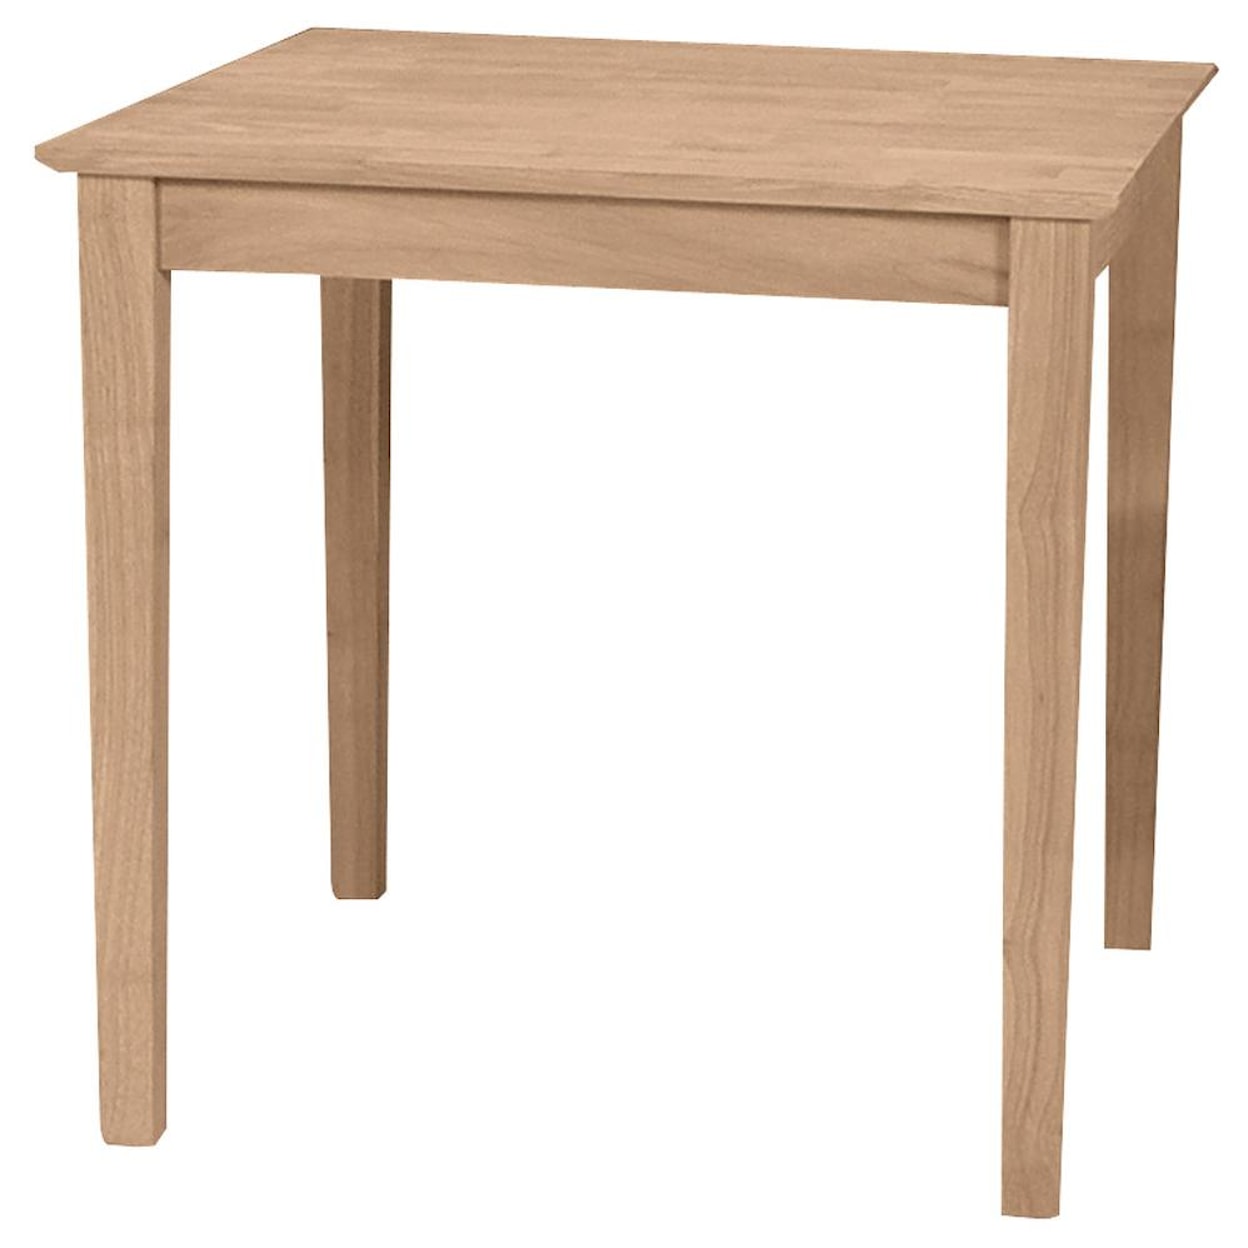 John Thomas SELECT Dining Room Square Solid Top Shaker Table